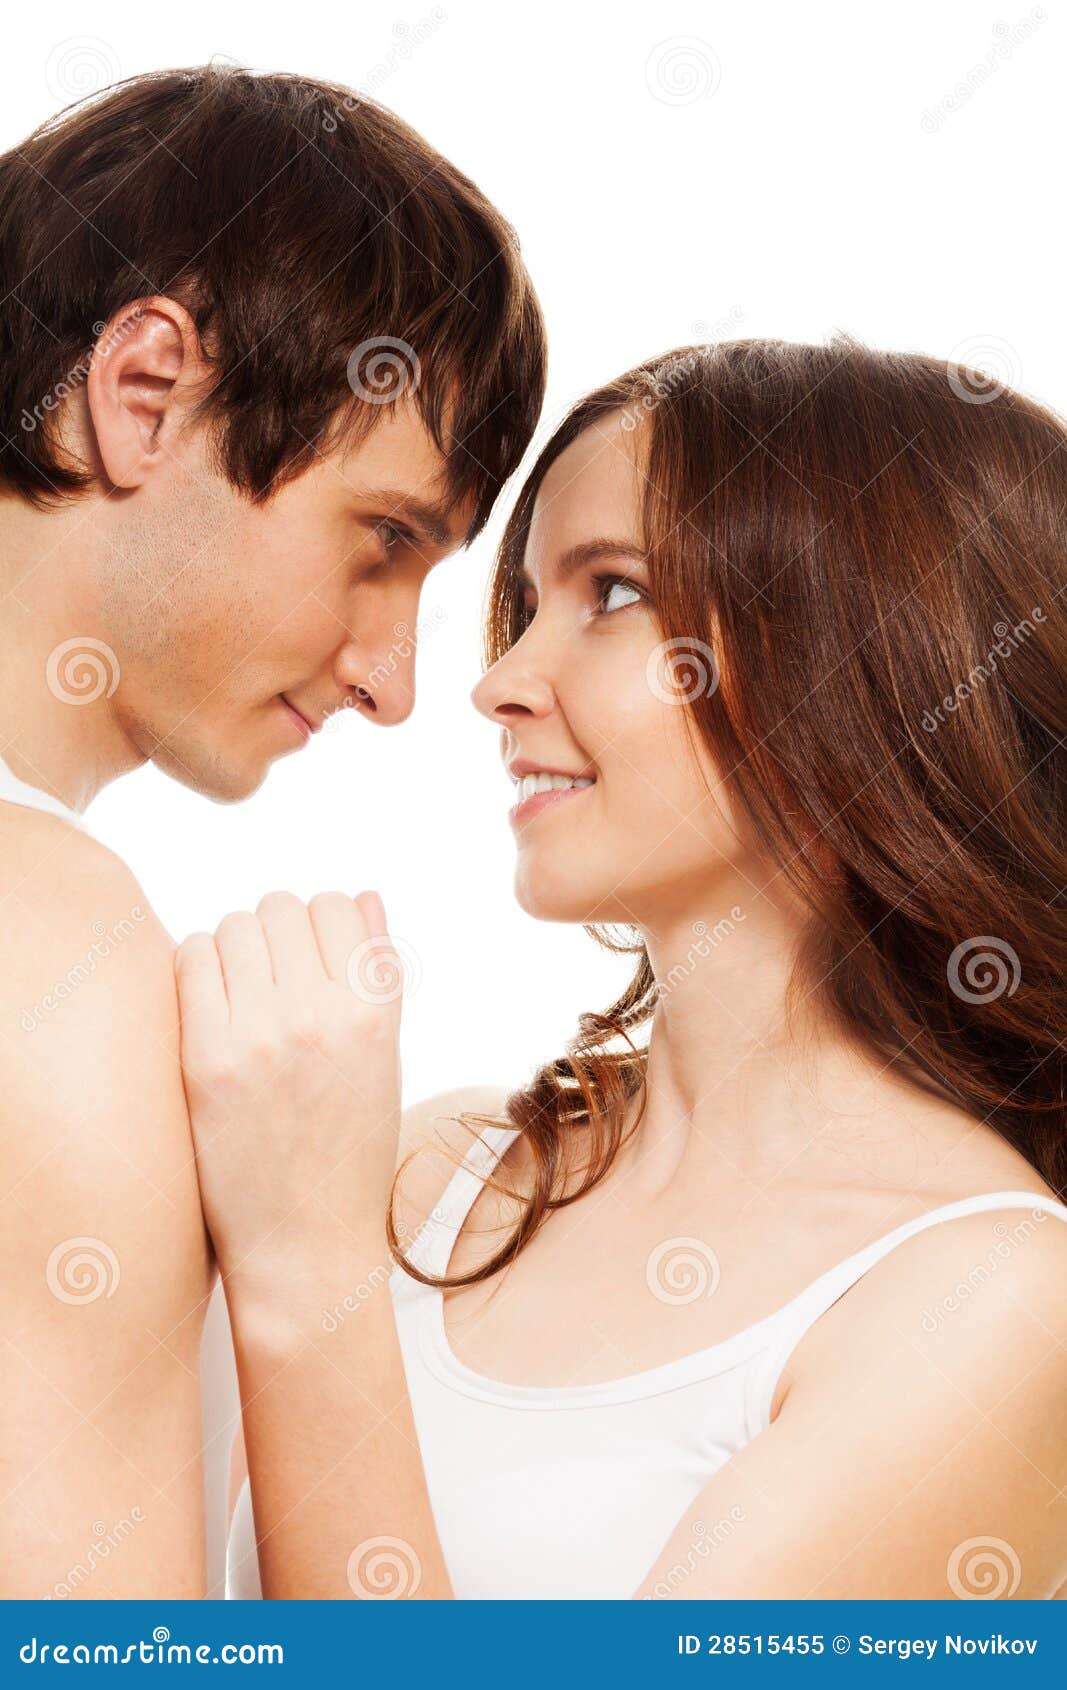 The Moment Of Intimacy Stock Image Image Of Adult Handsome 28515455